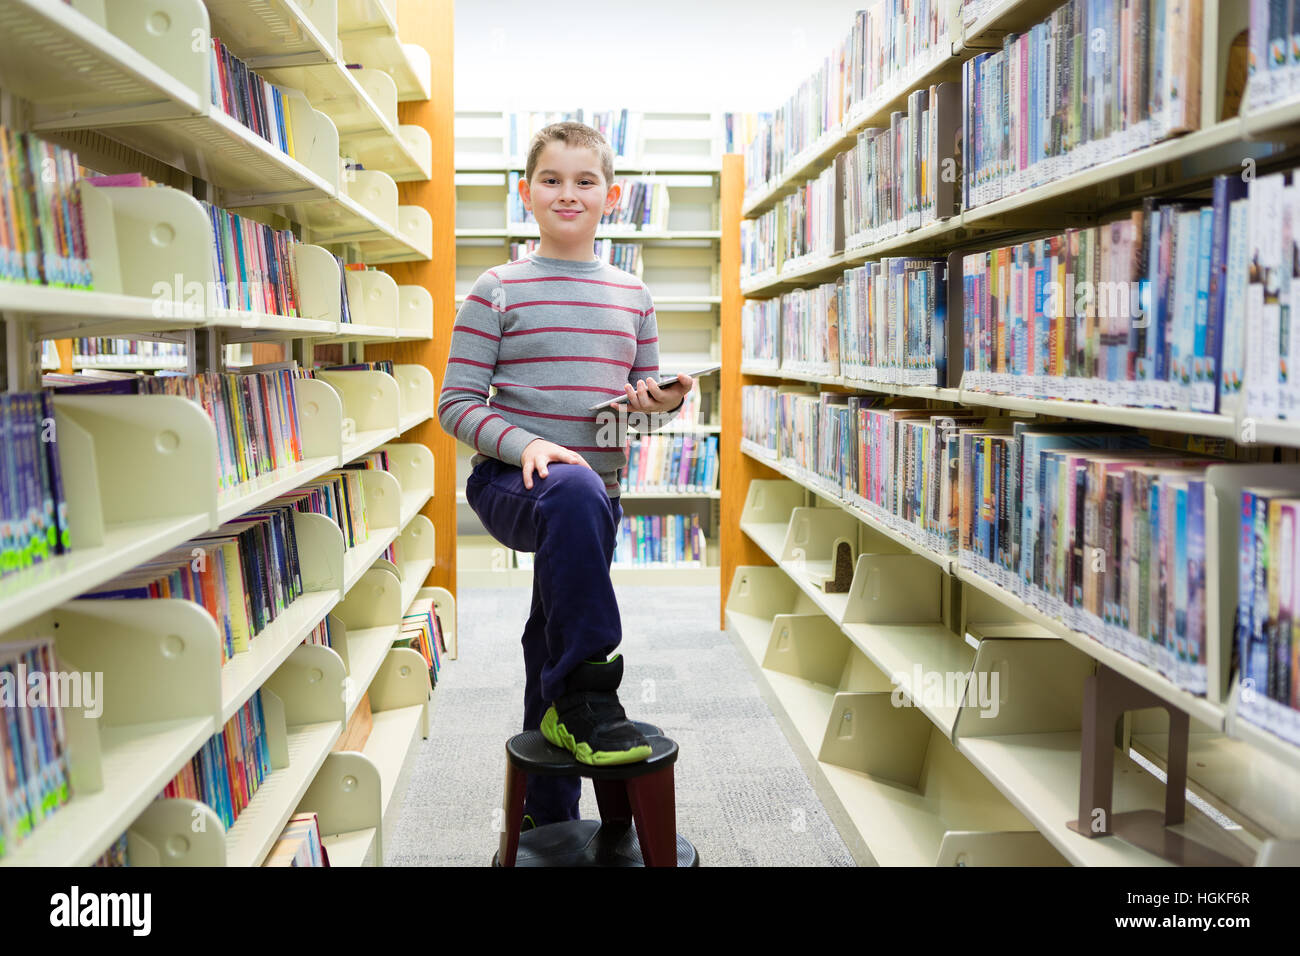 Happy boy in library surrounded by book shelves with foot on stool Stock Photo